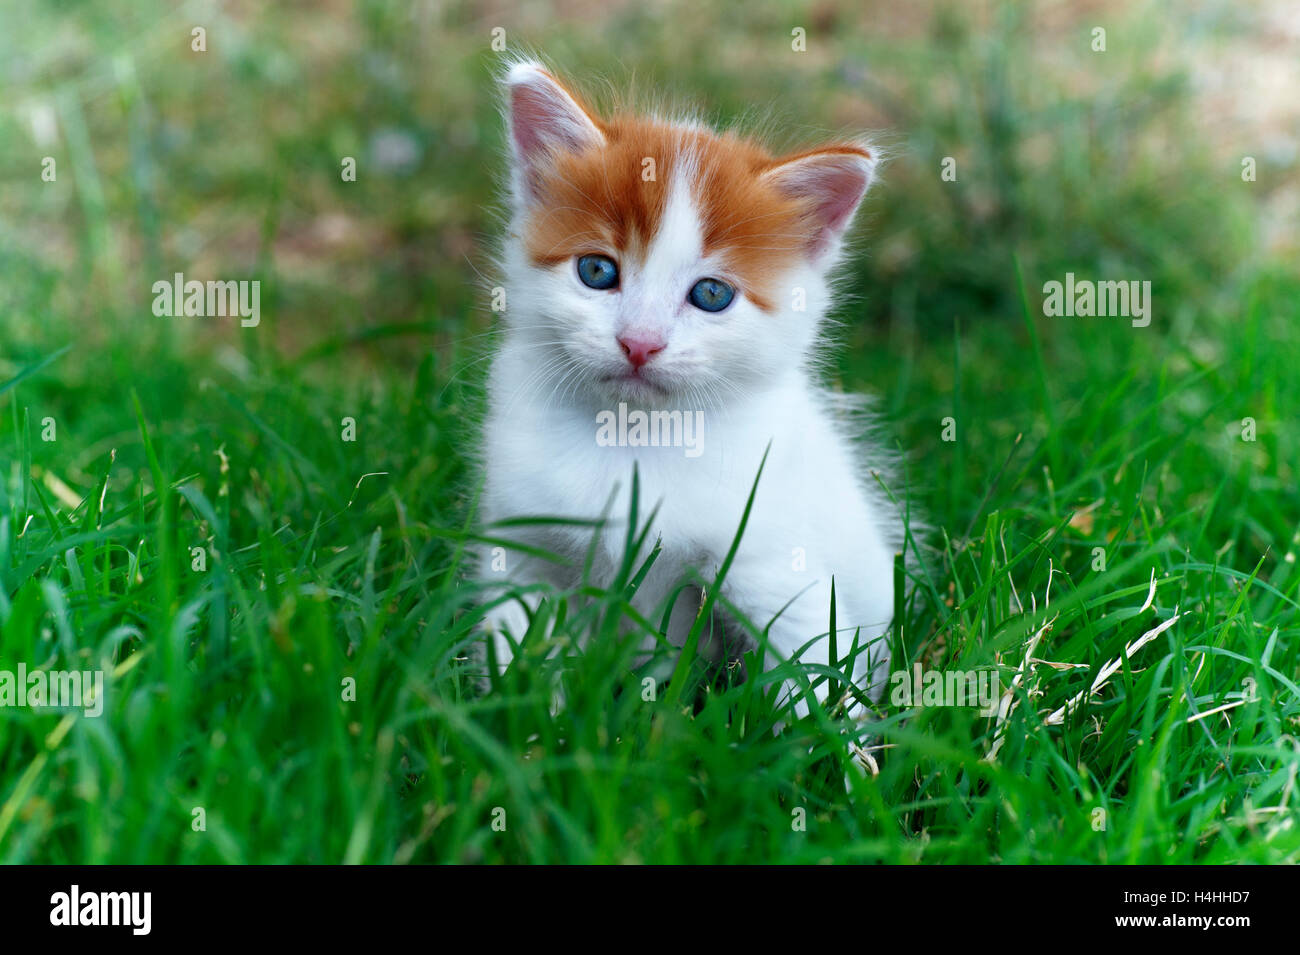 Five weeks old kitten sitting in the grass Stock Photo